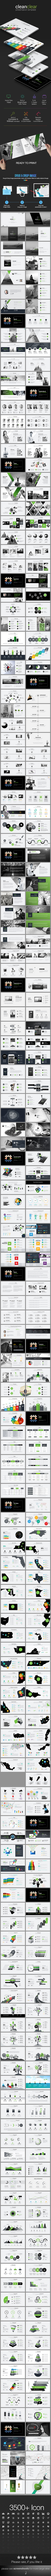 simple -clean  Powerpoint Presentation Template